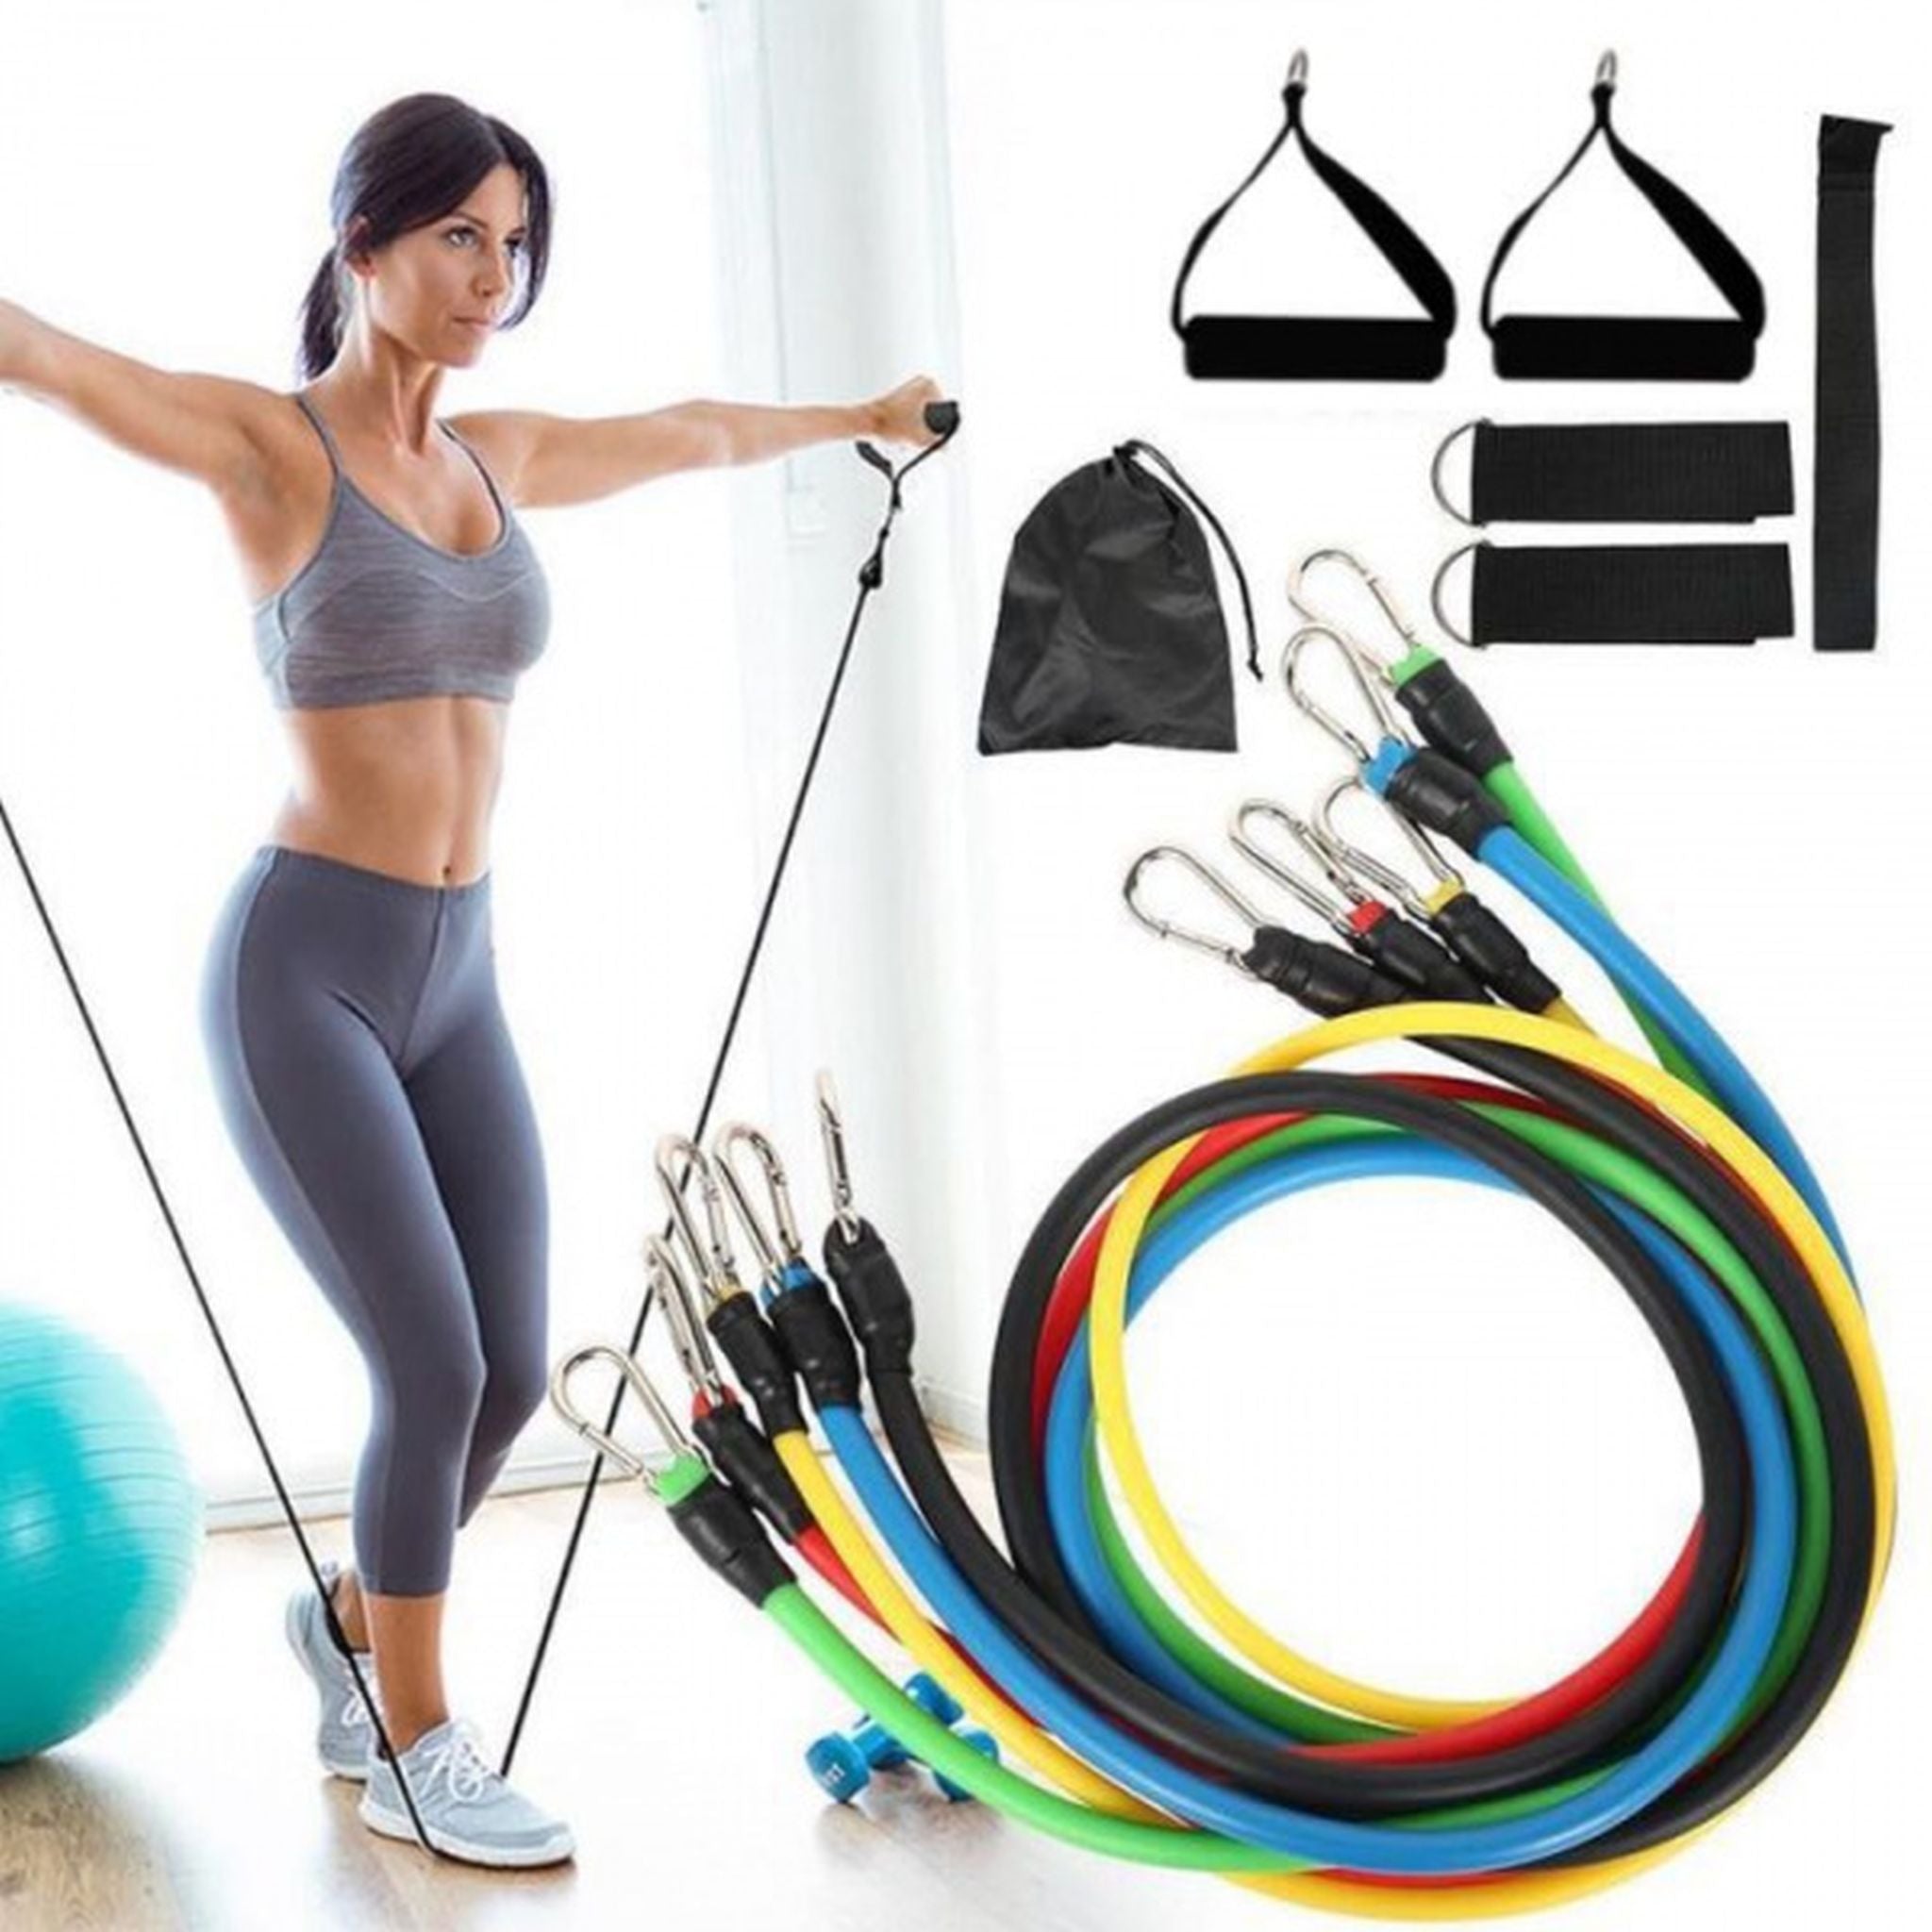 Olympic Fitness Resistance Kit